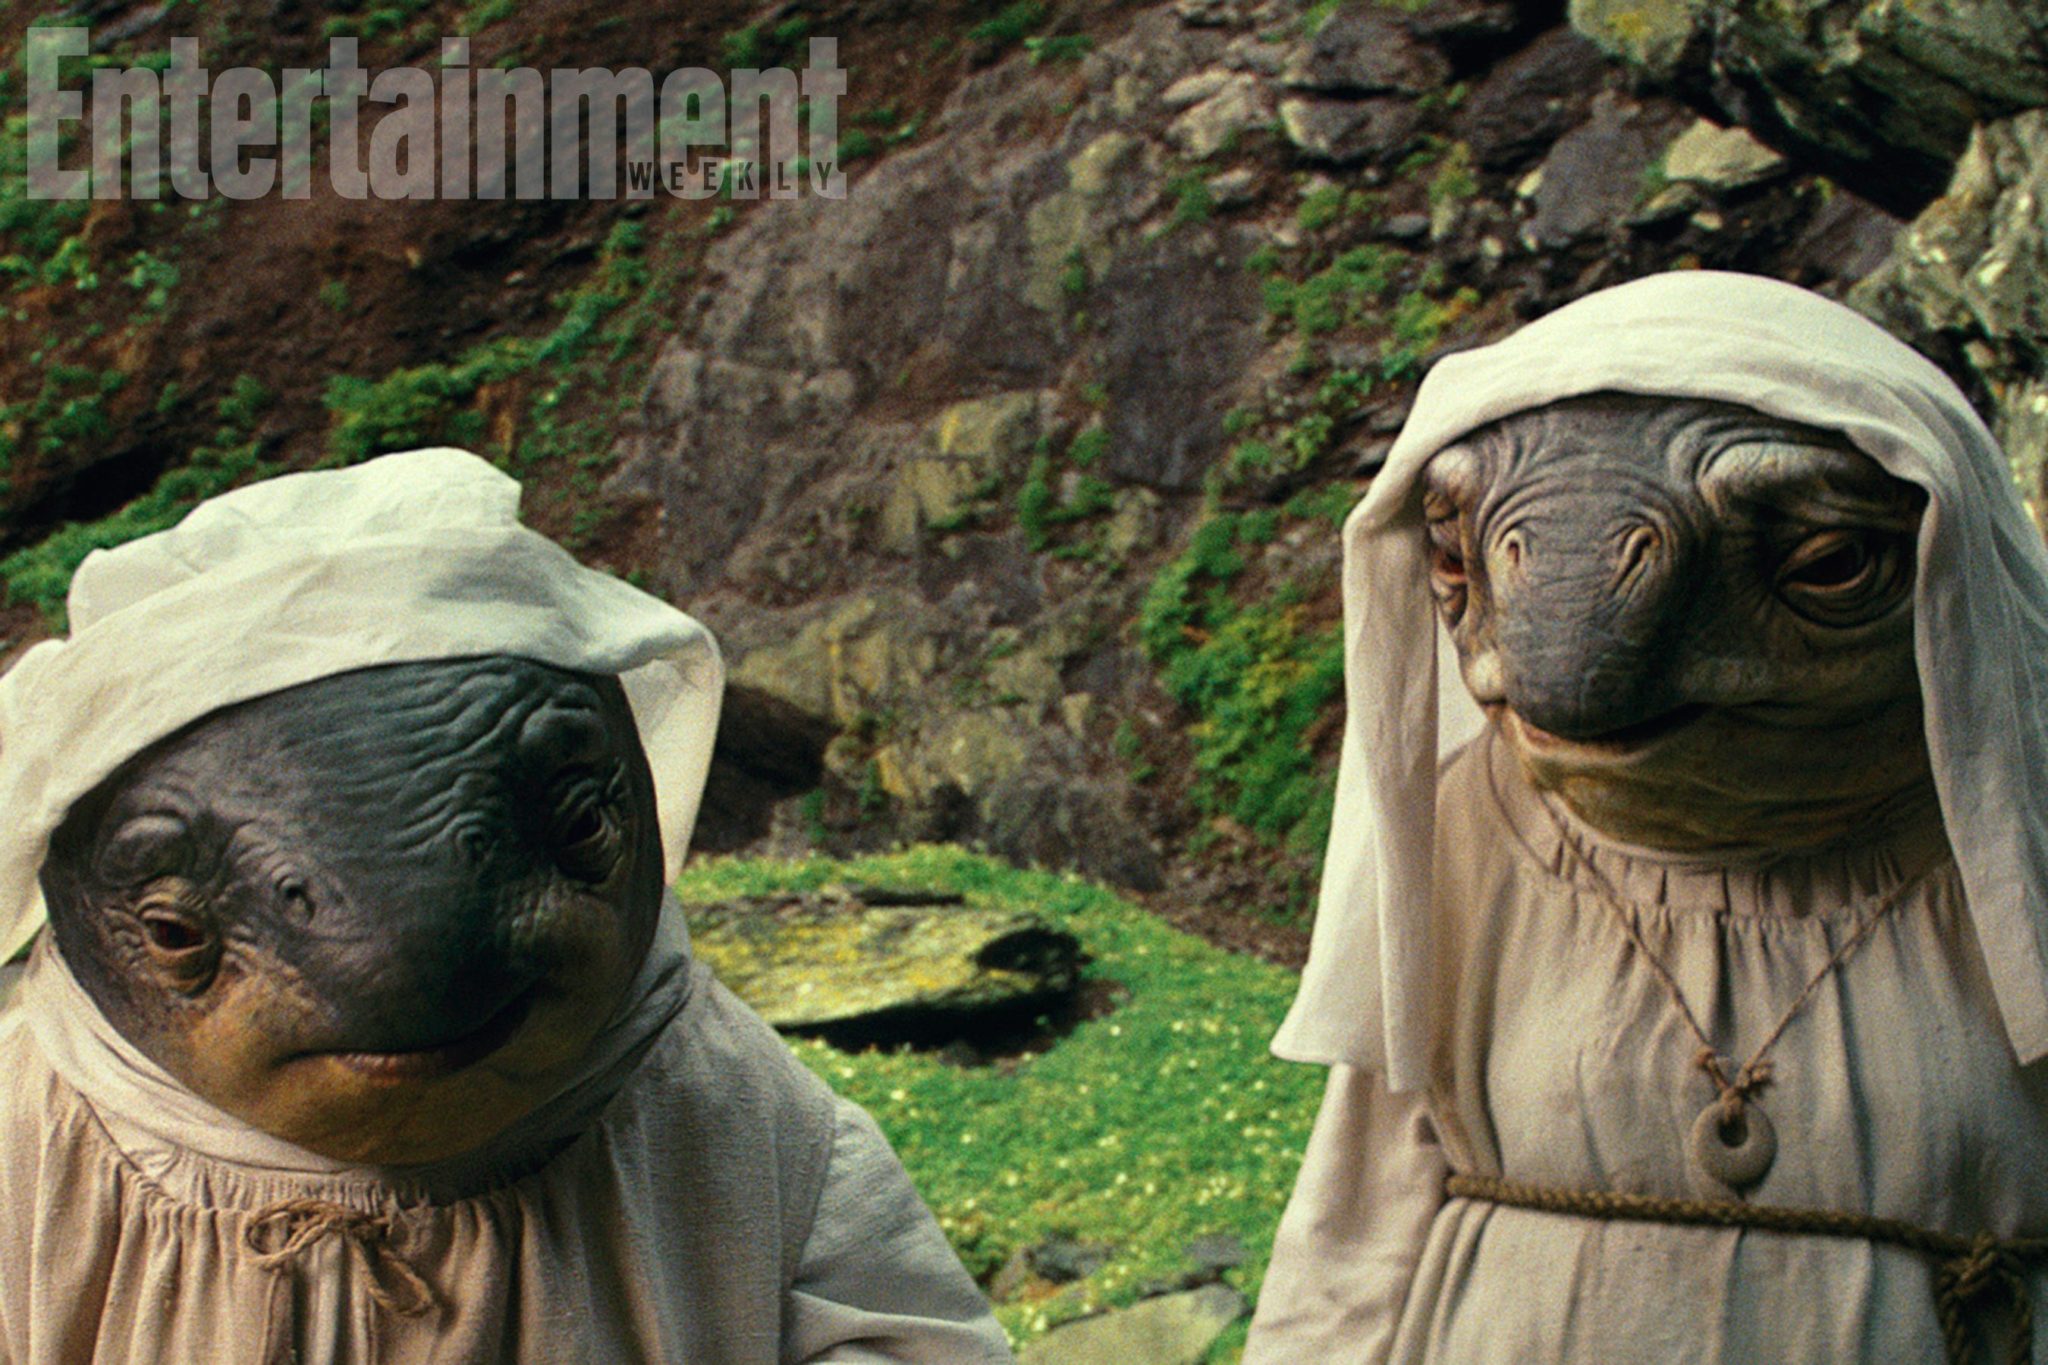 Entertainment Weekly Has Released Some exclusive photos from Star Wars: The Last Jedi!